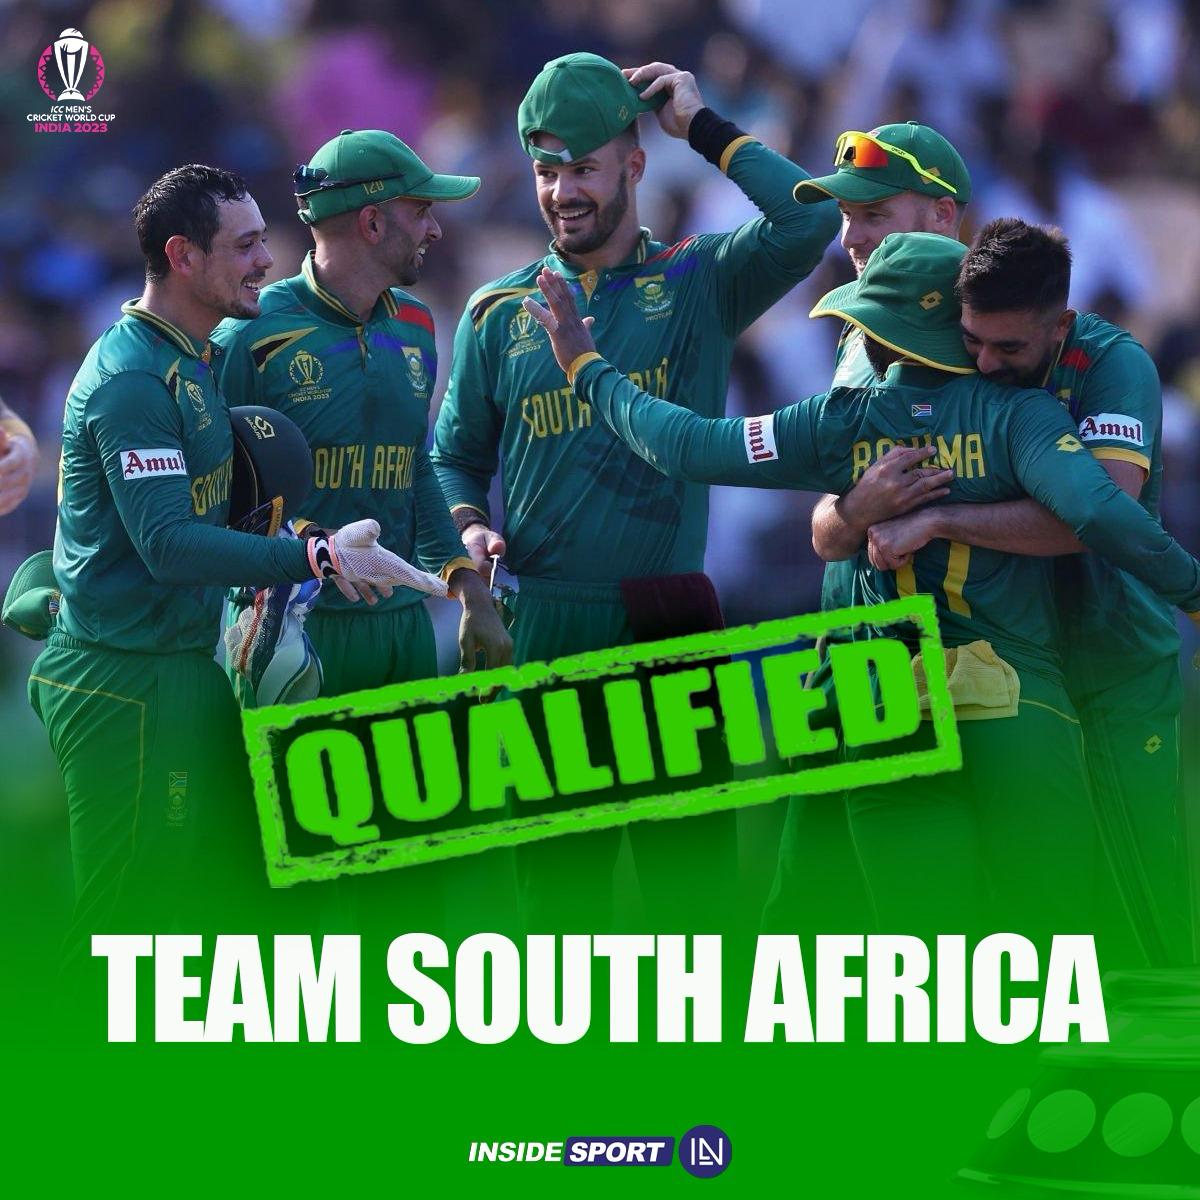 South Africa becomes the 2nd team to qualify for the Semis of CWC 23 🇿🇦👏🏻

#SouthAfricaCricket #CWC23 #Insidesport #CricketTwitter